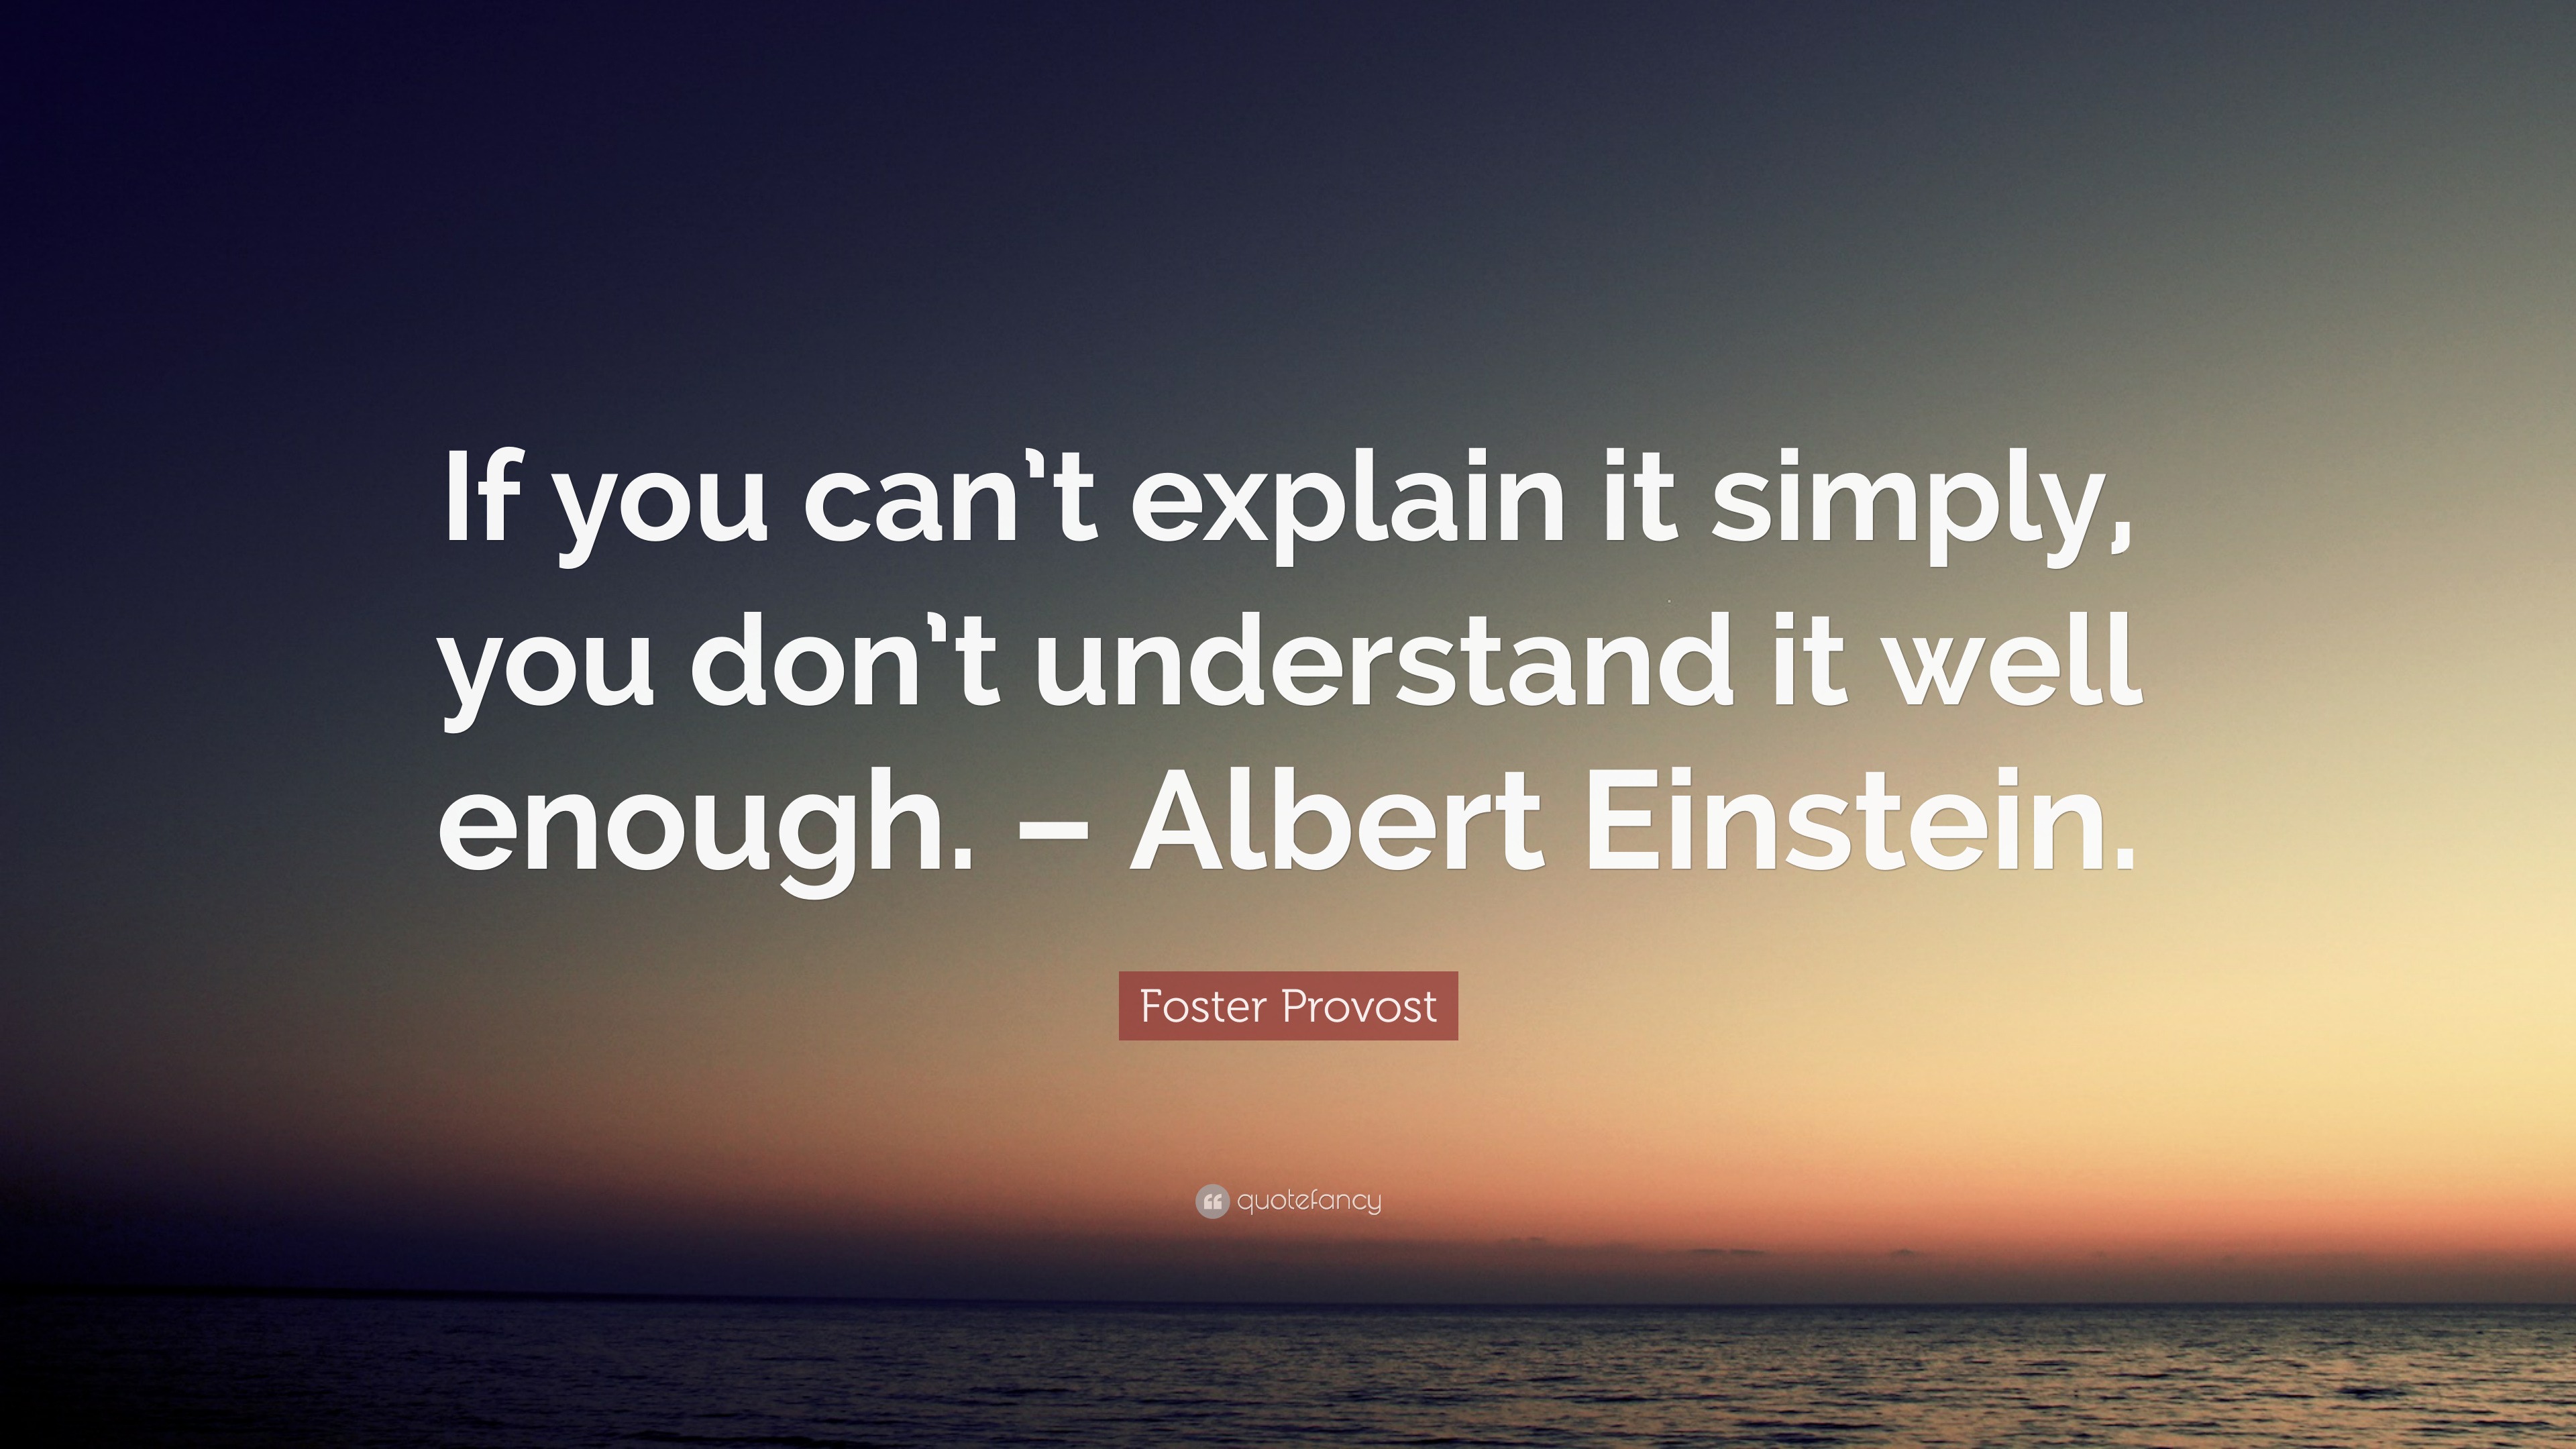 Foster Provost Quote “if You Cant Explain It Simply You Dont